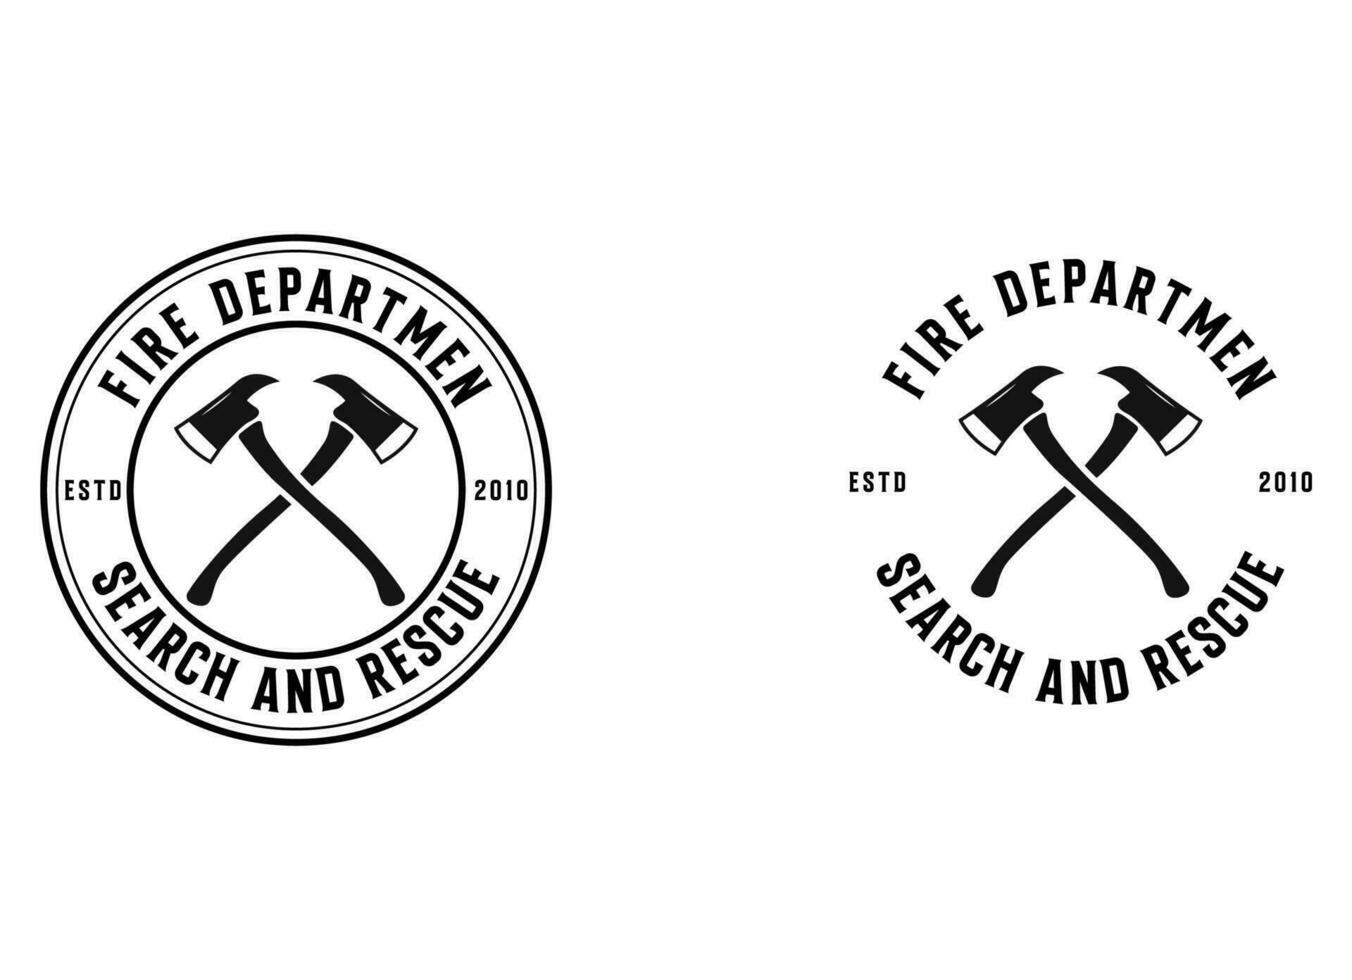 Fire department logos, modern and vintage style logo vector